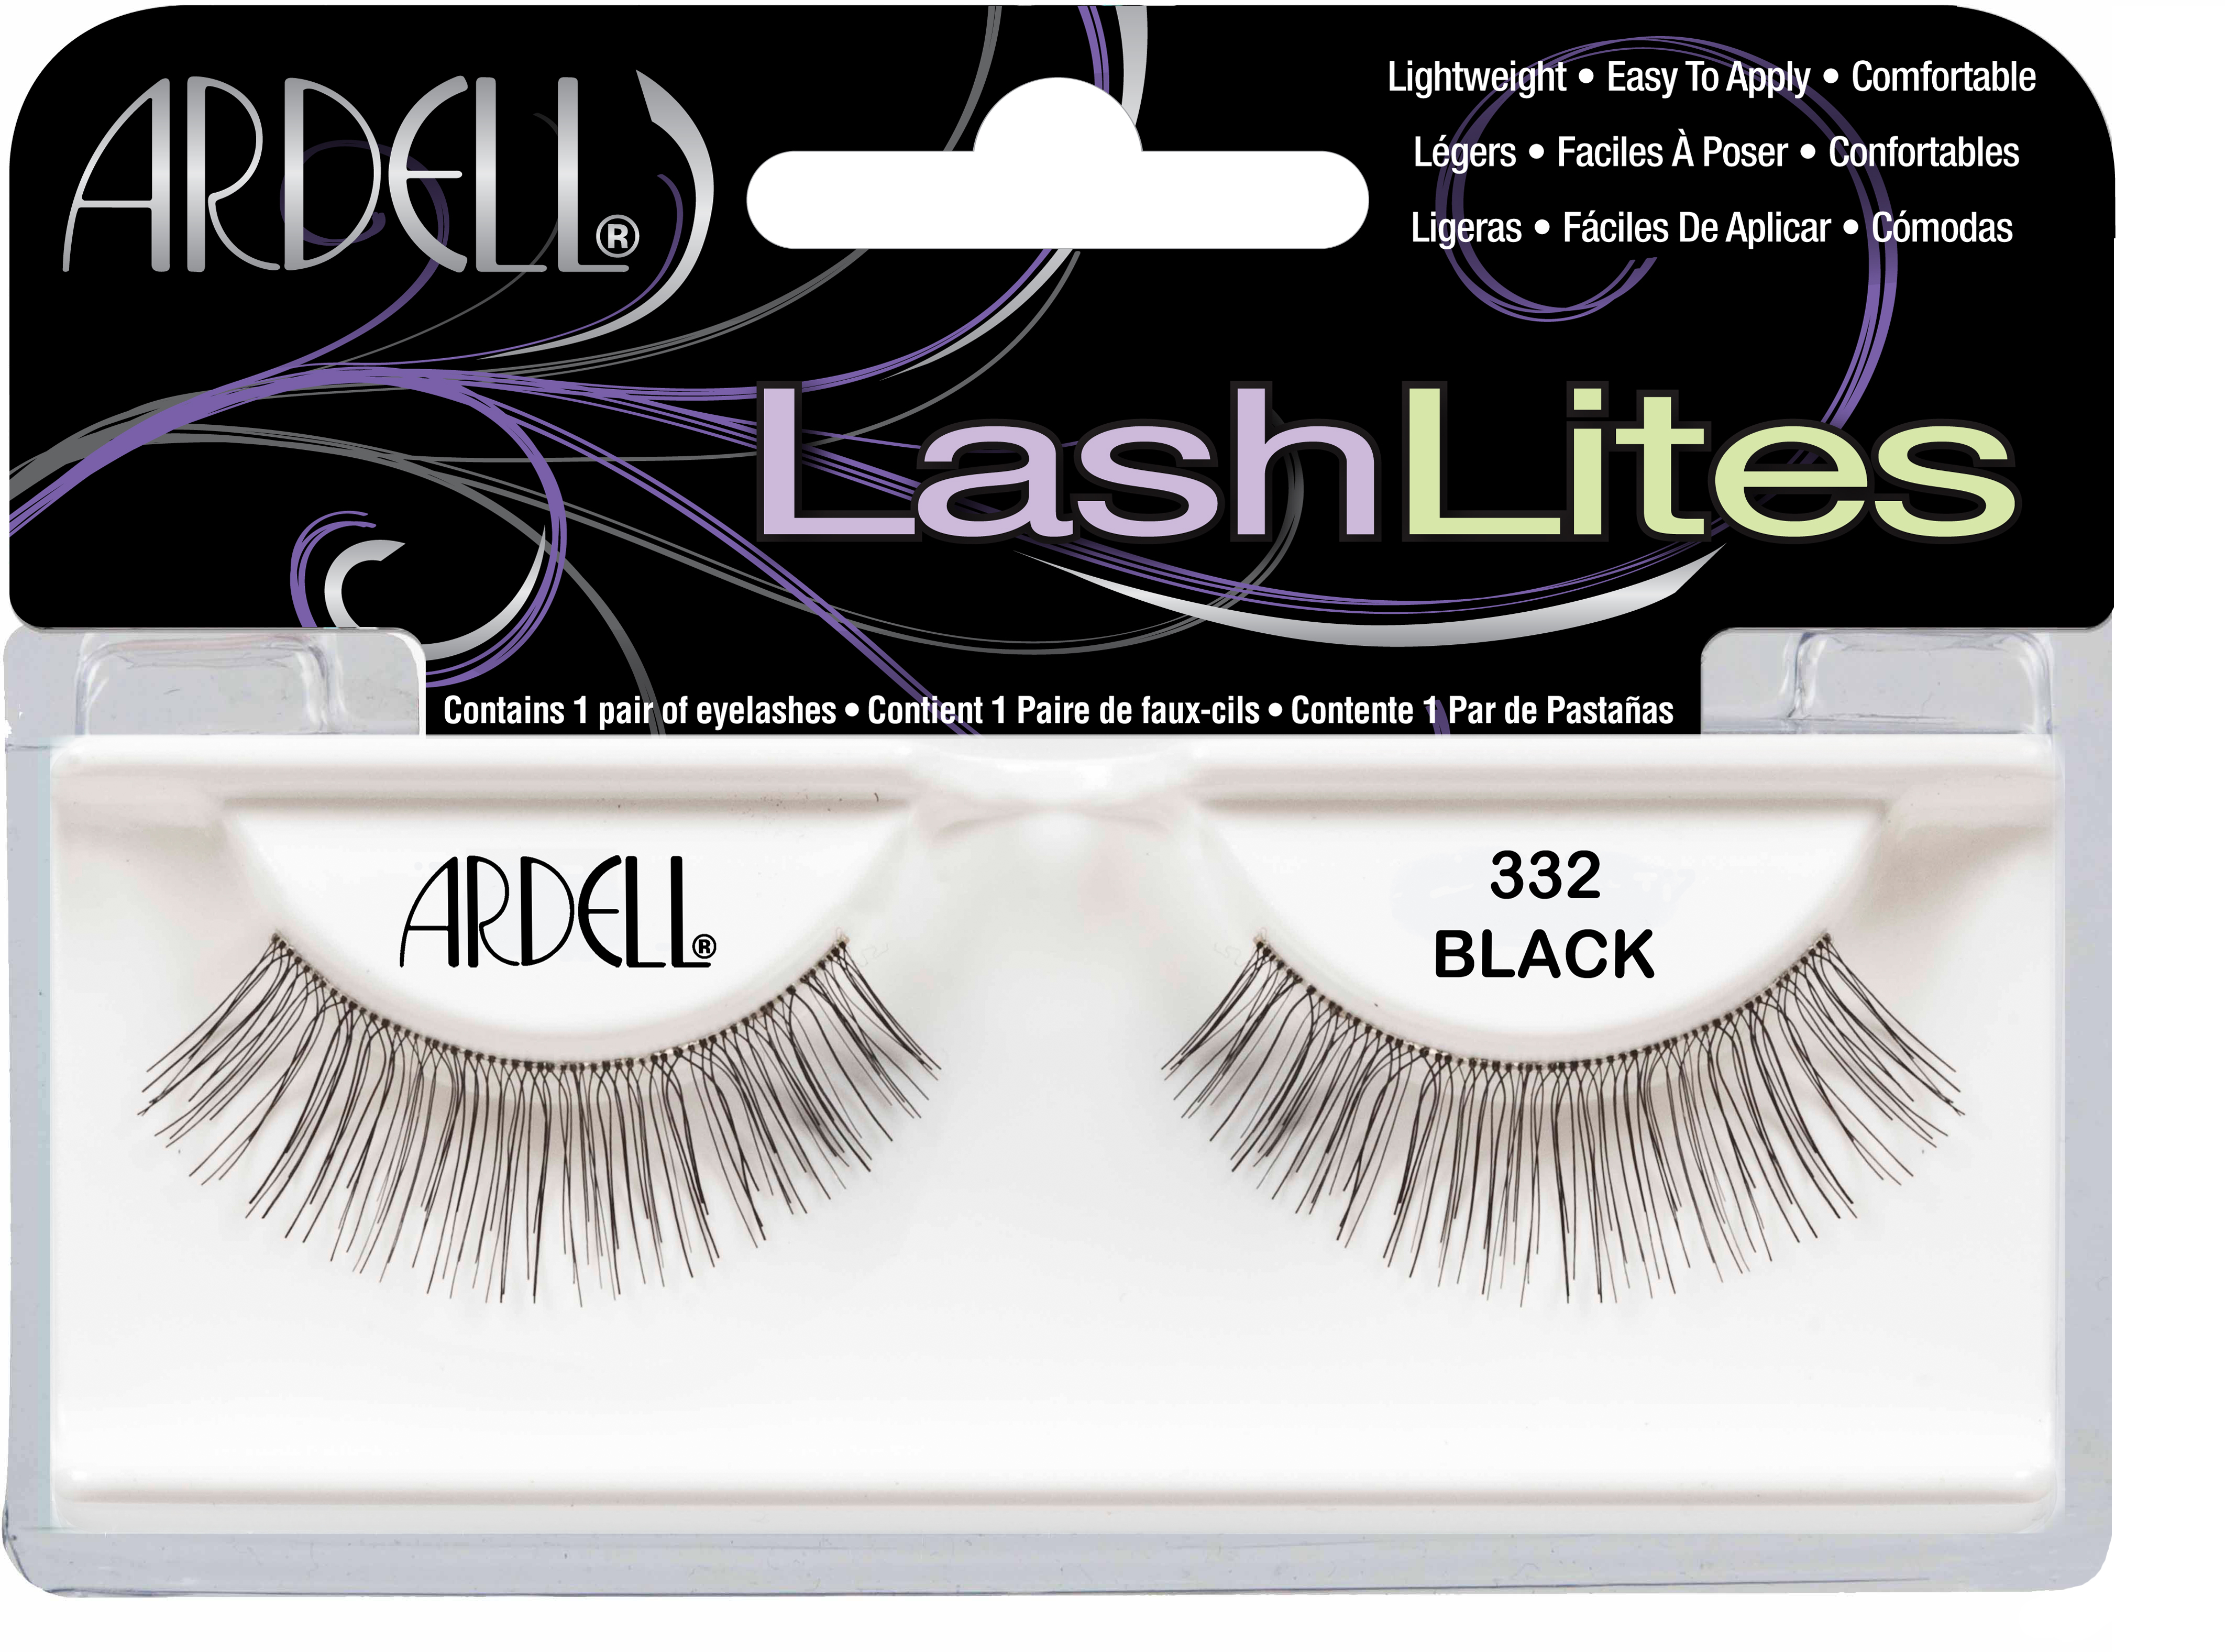 Ardell Lash Lites Most Natural Styles 332